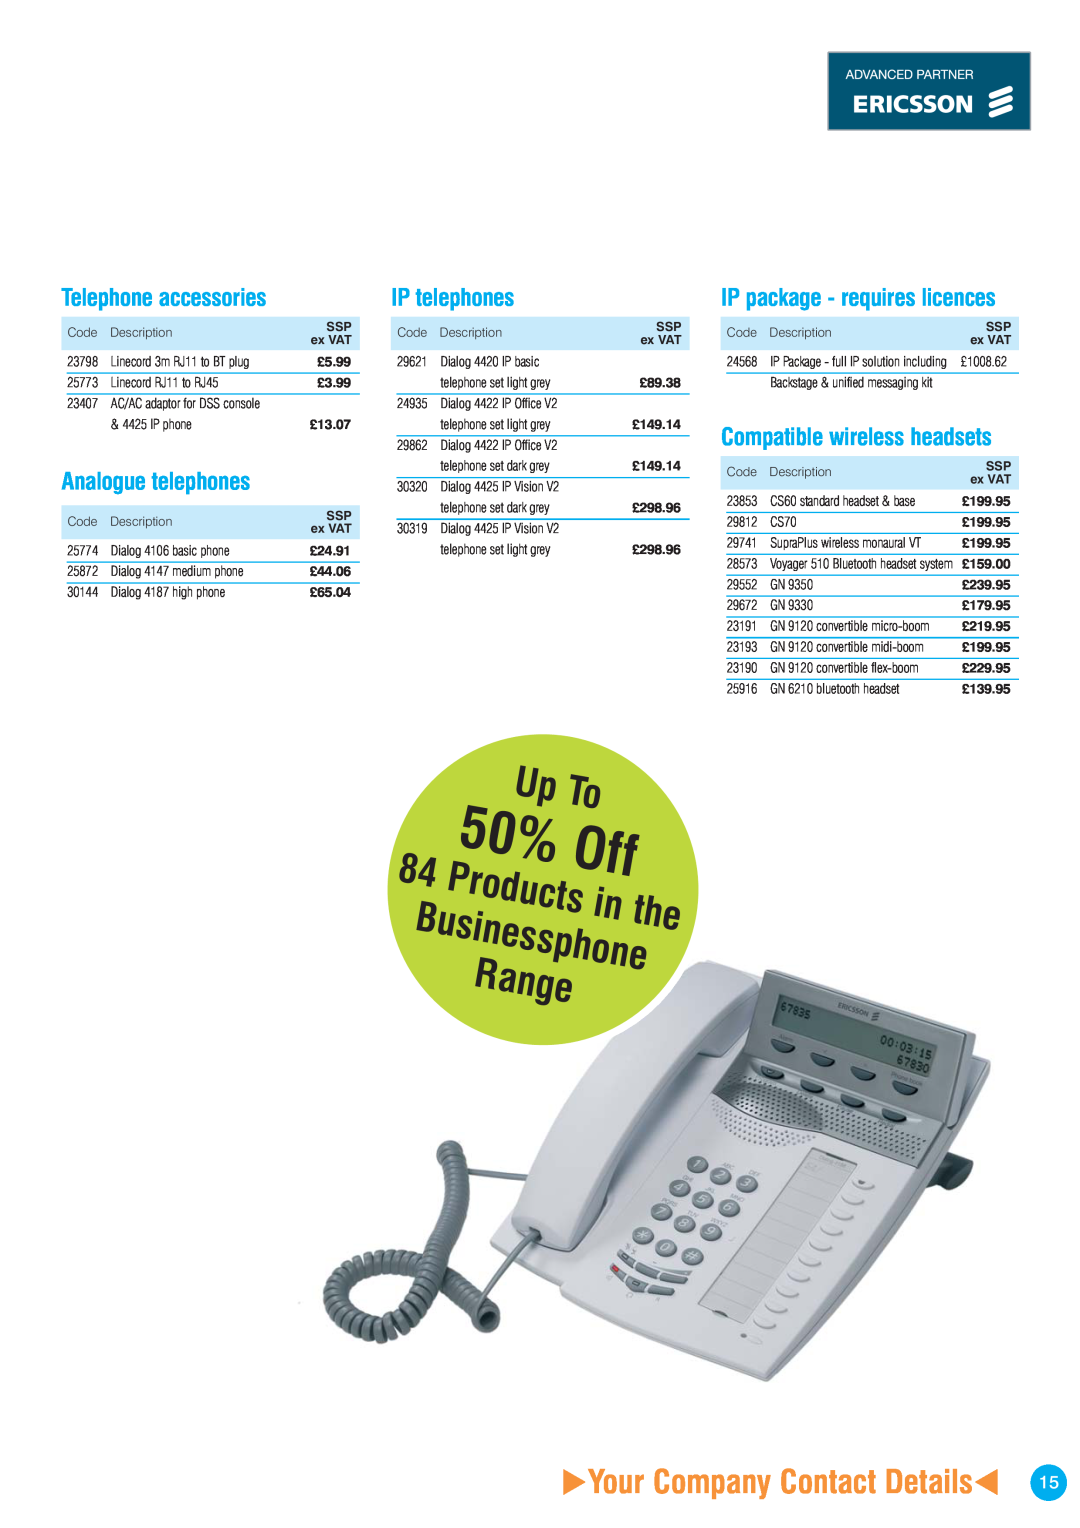 Ericsson ISDN2 Products in the, Businessphone, Range, Your Company Contact Details, Telephone accessories, IP telephones 